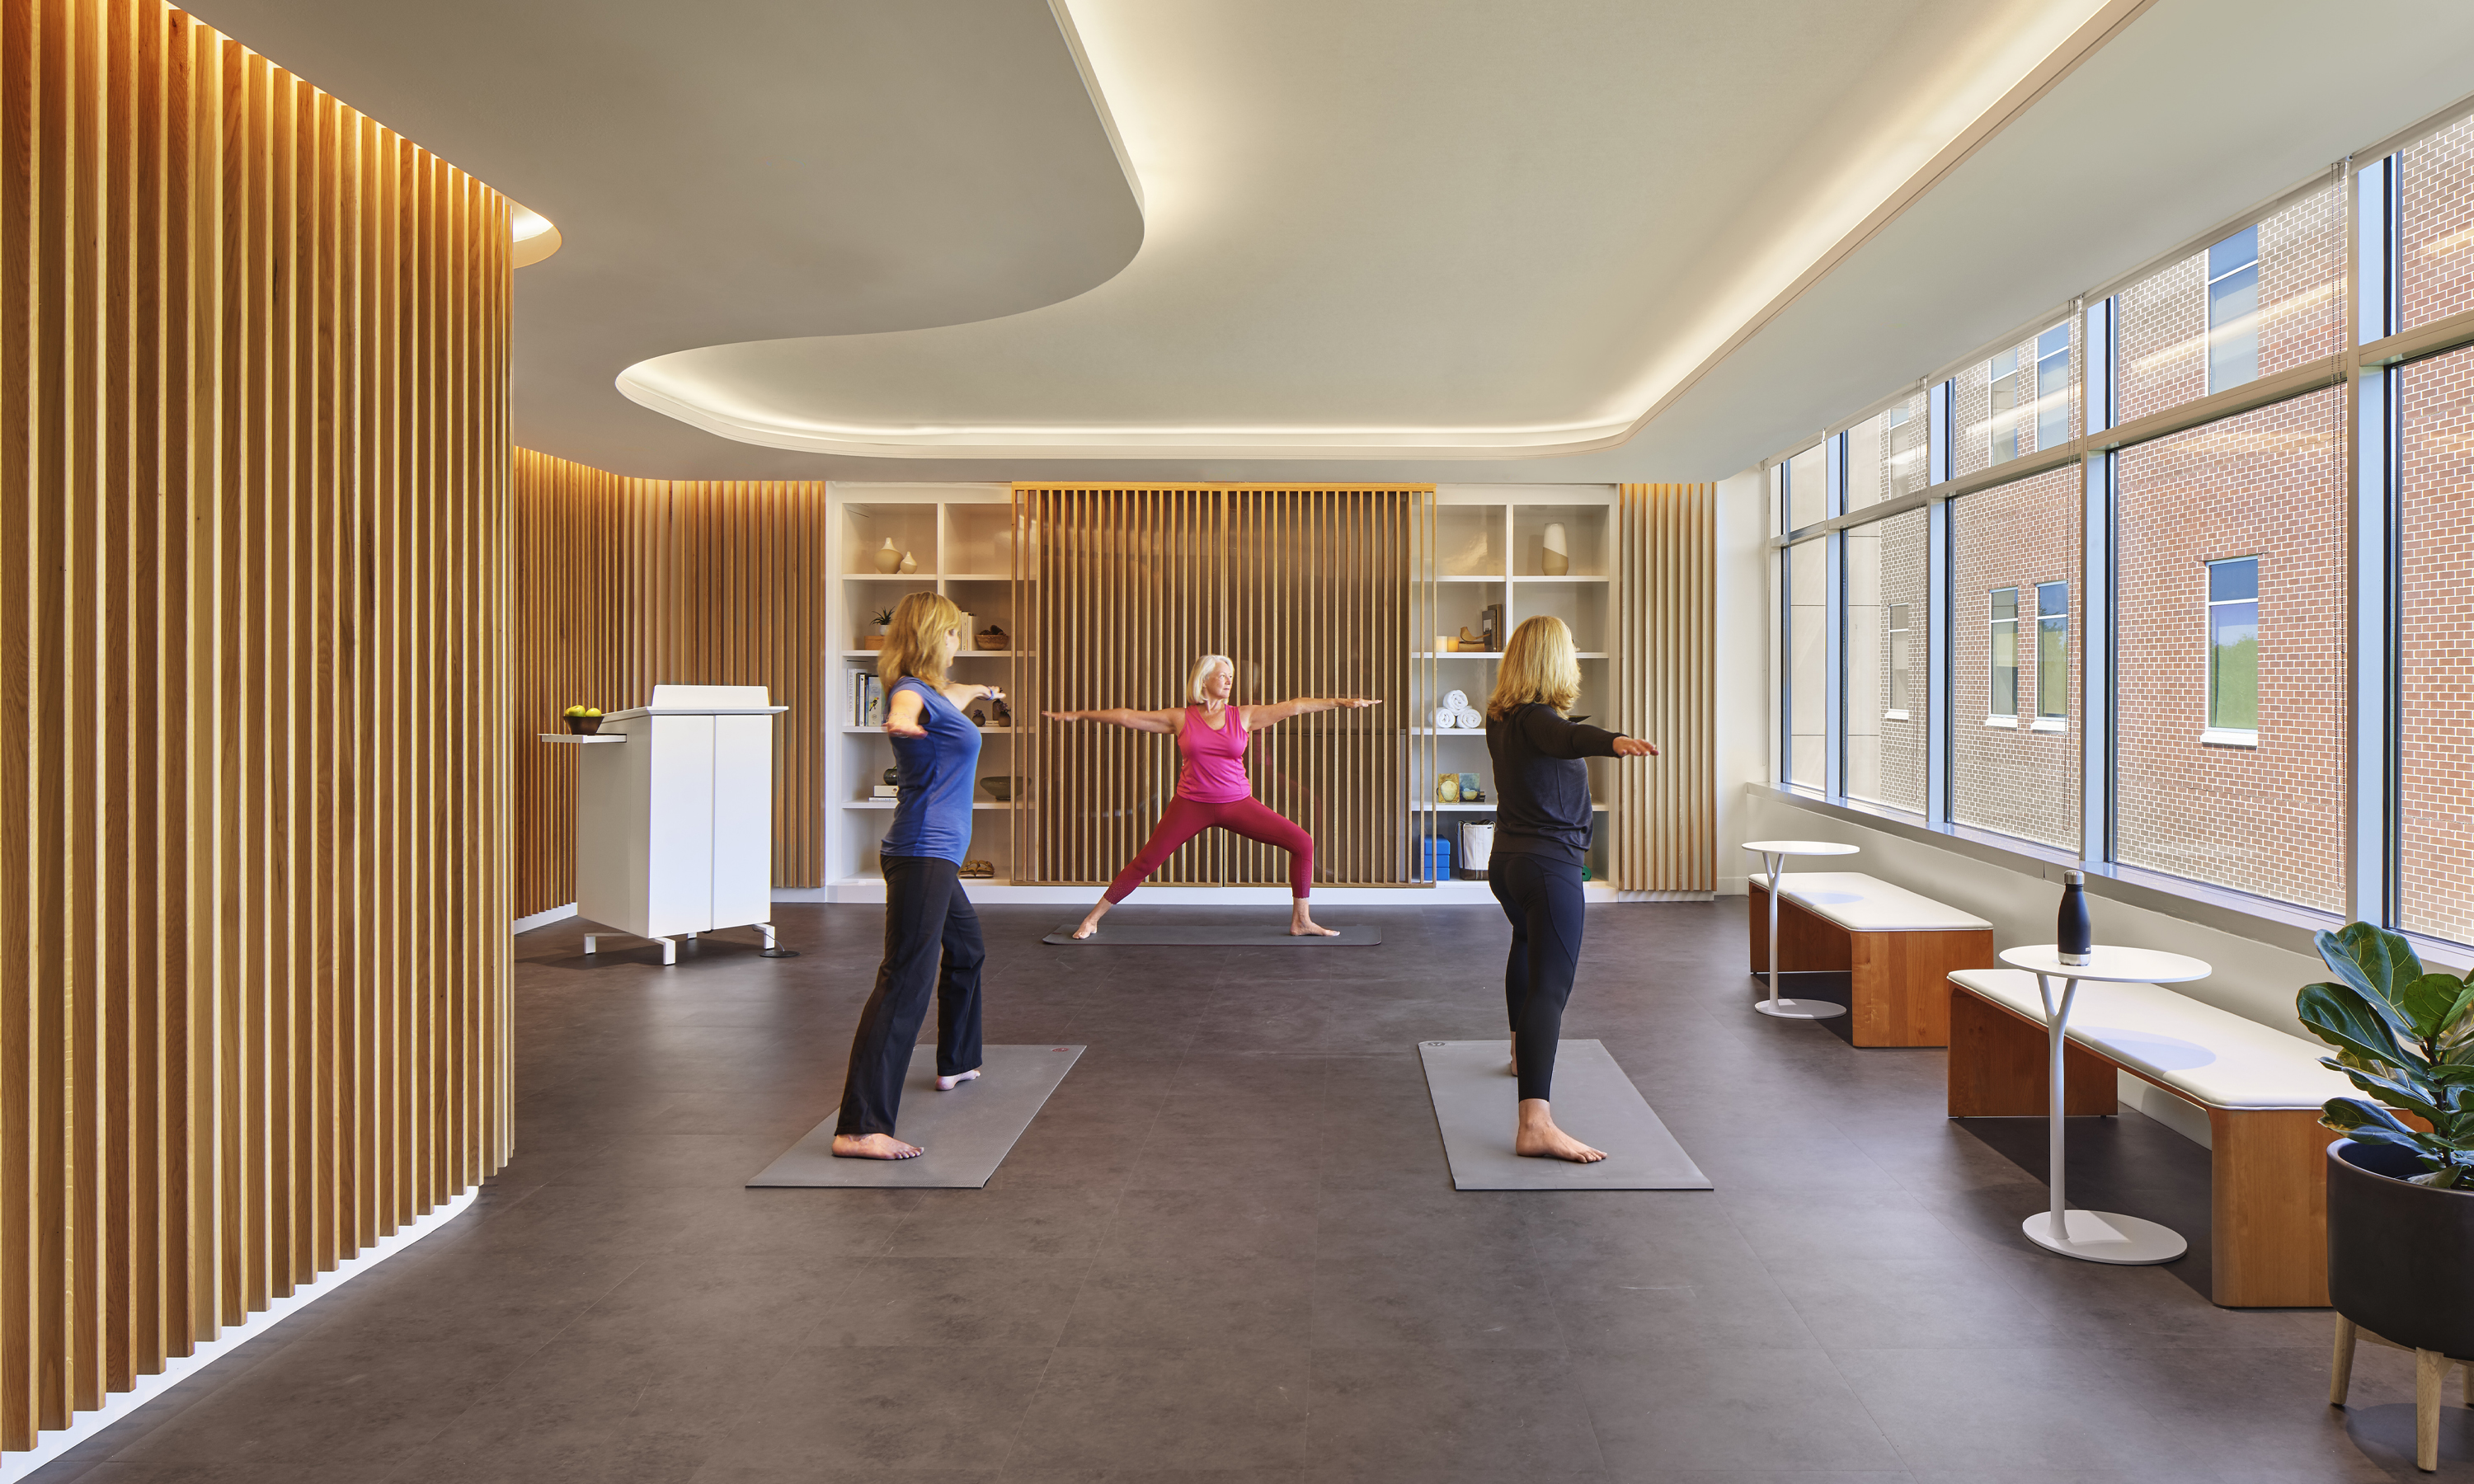 High tech lectern in yoga studio at the Bill Richards Center for Healing at Aquilino Cancer Center, designed by gensler.